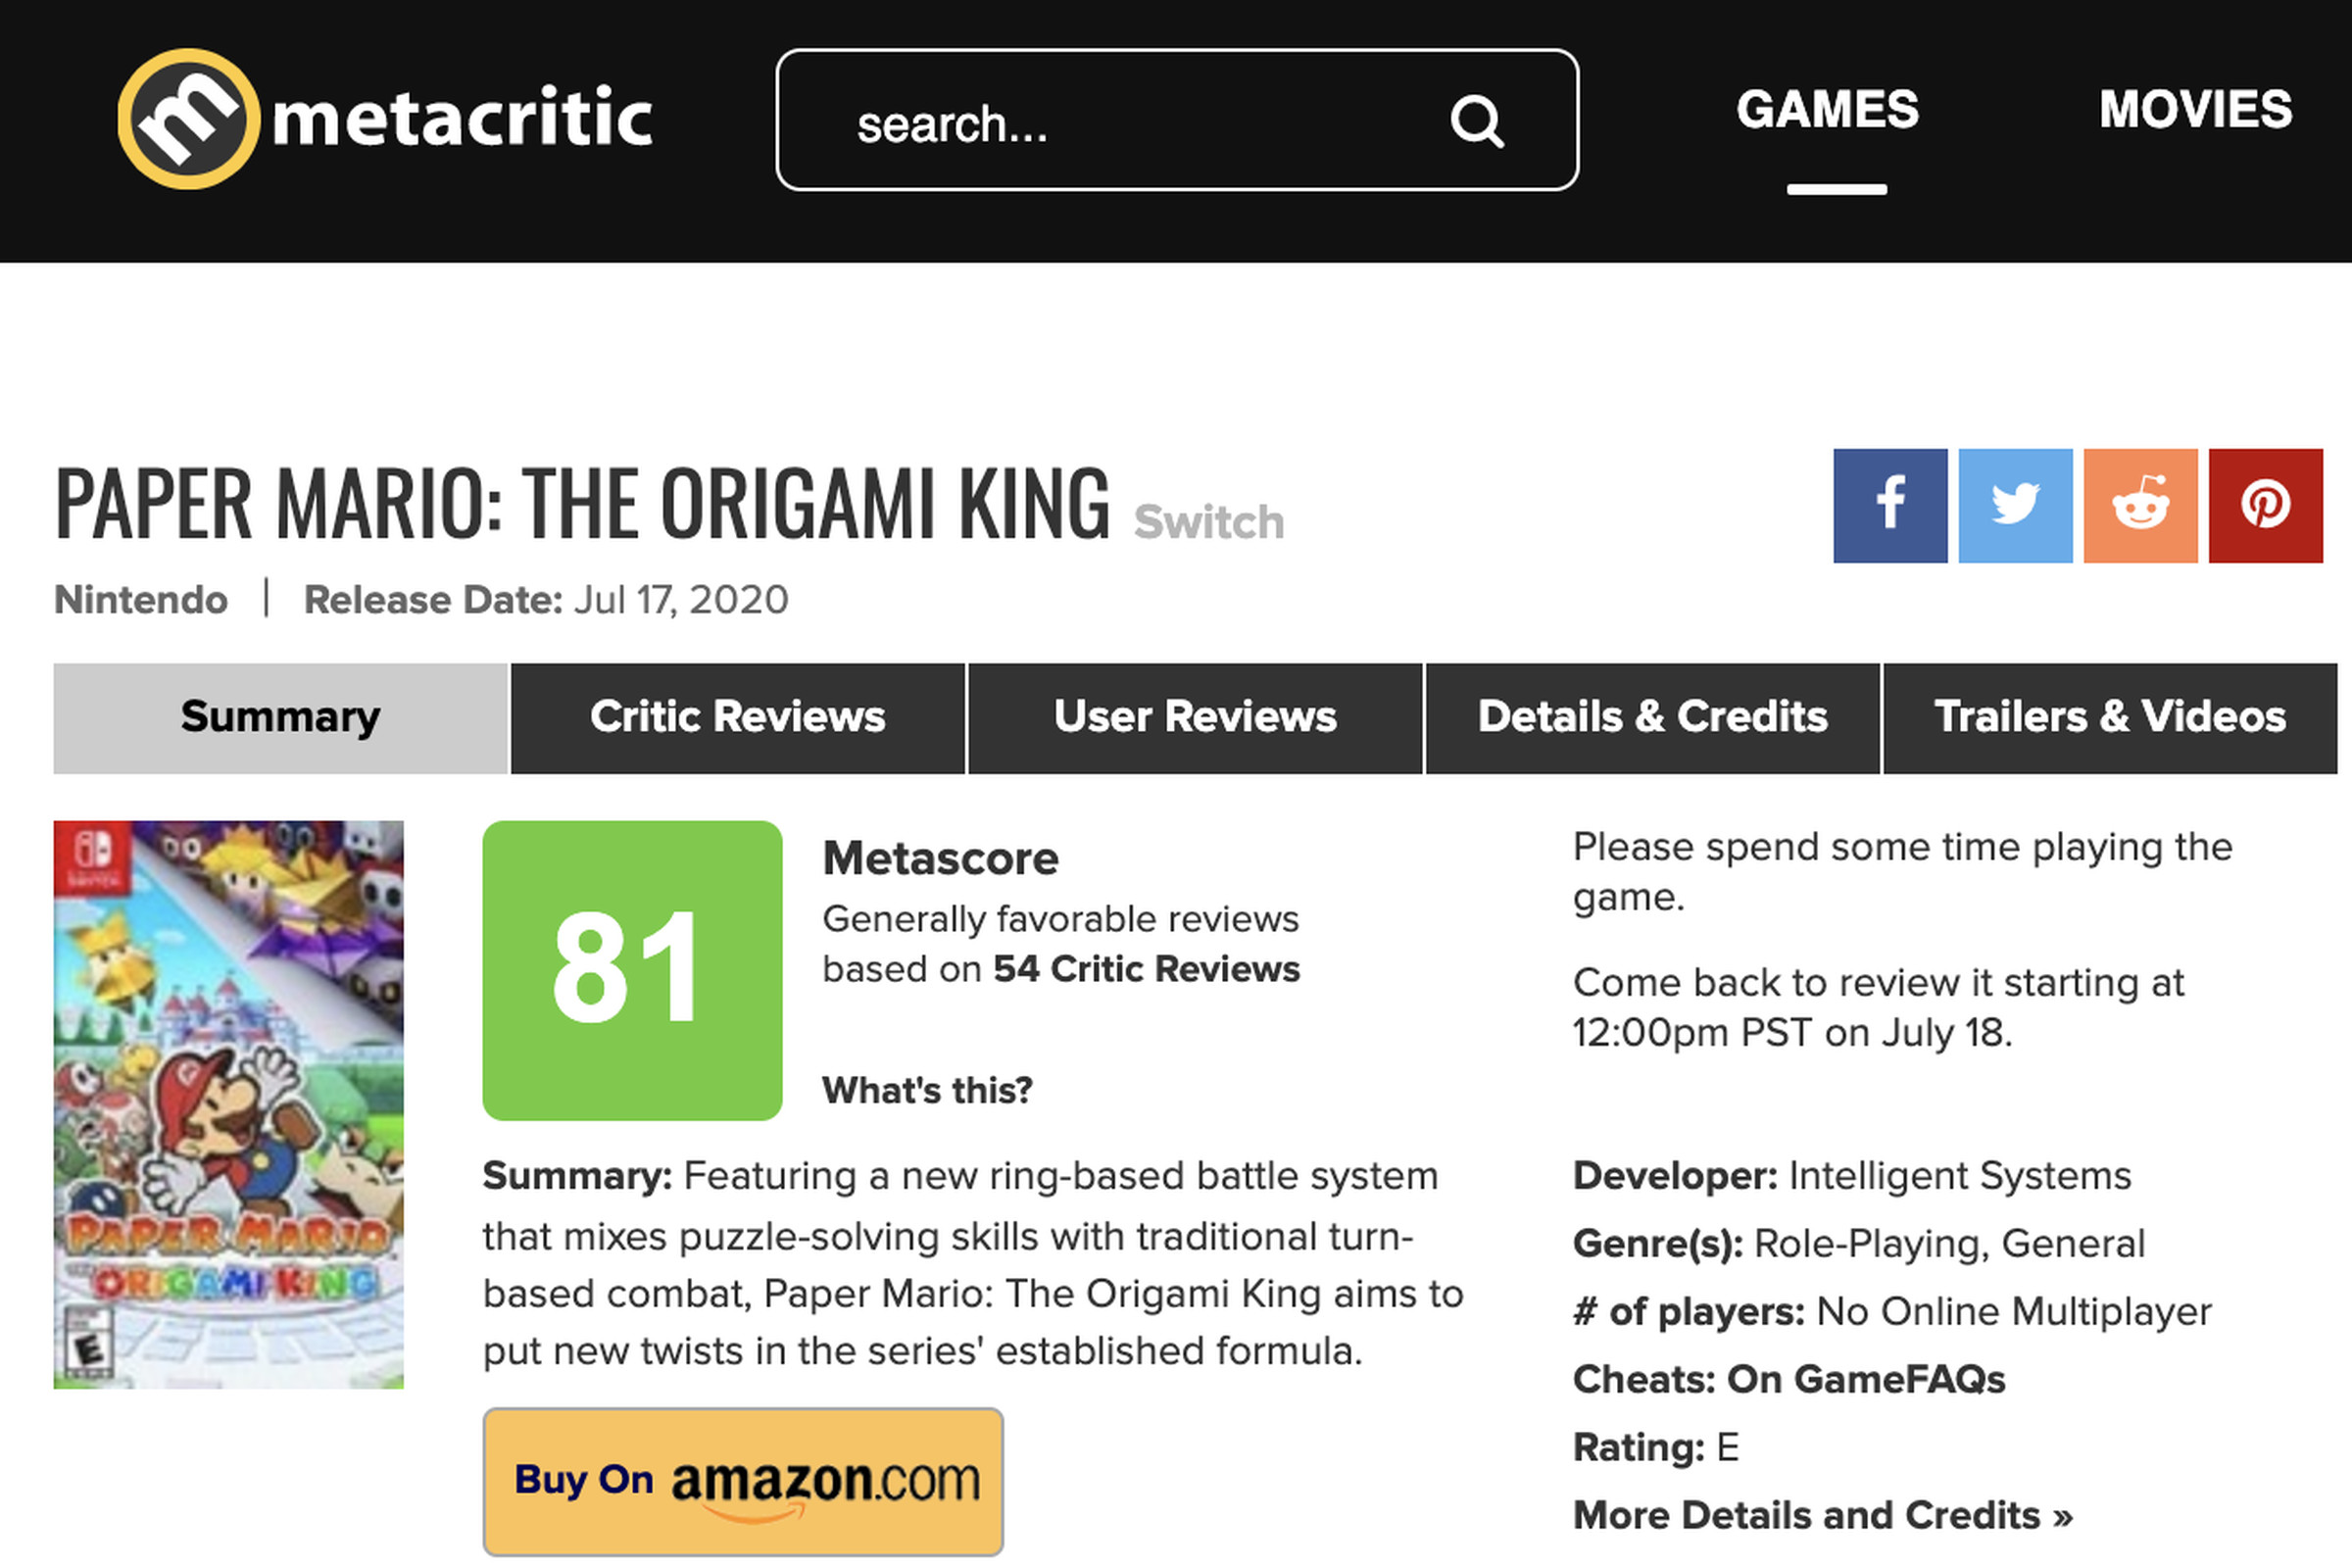 Paper Mario: The Origami King came out on July 17th, but user reviews won’t be available until July 18th